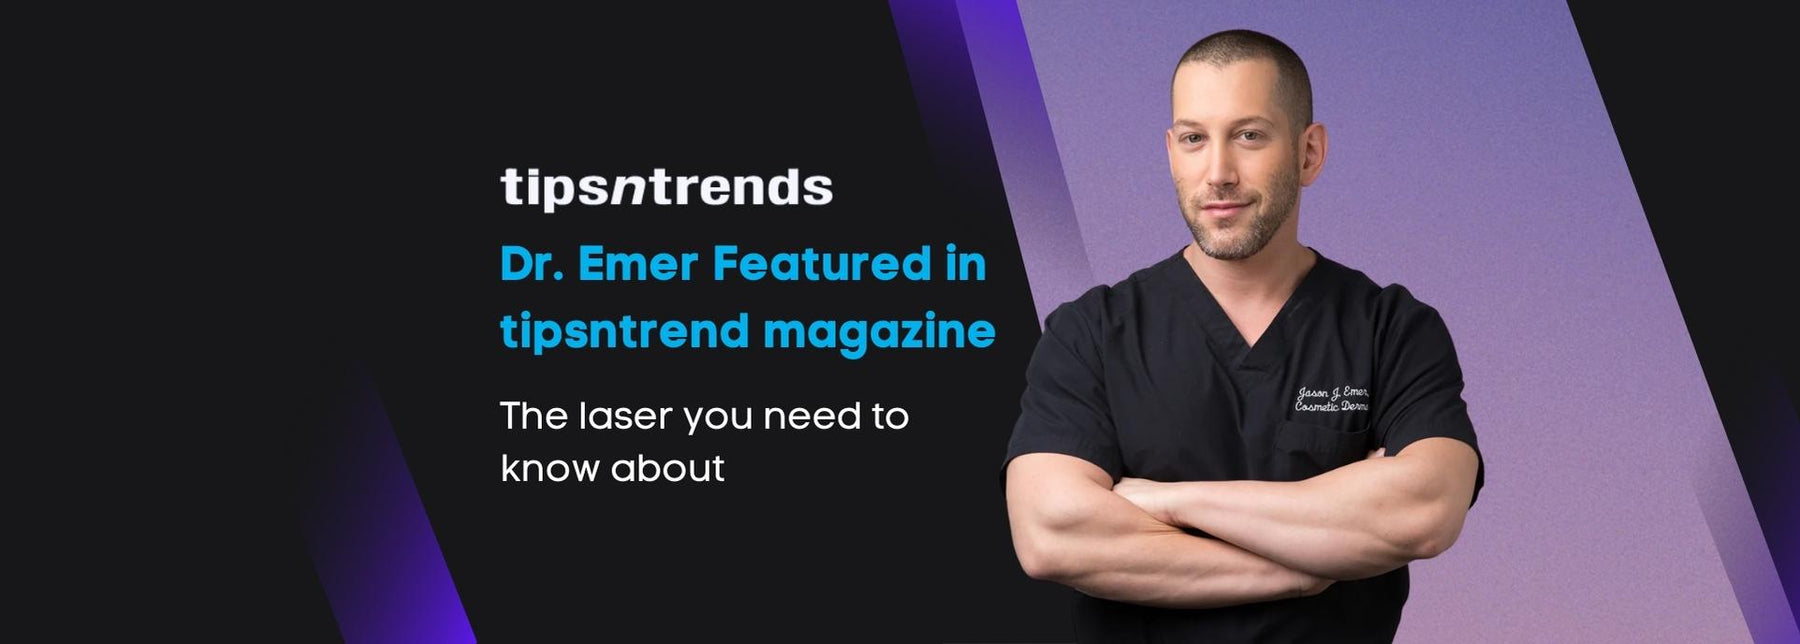 Dr. Emer Featured in tipsntrends | The laser you need to know about